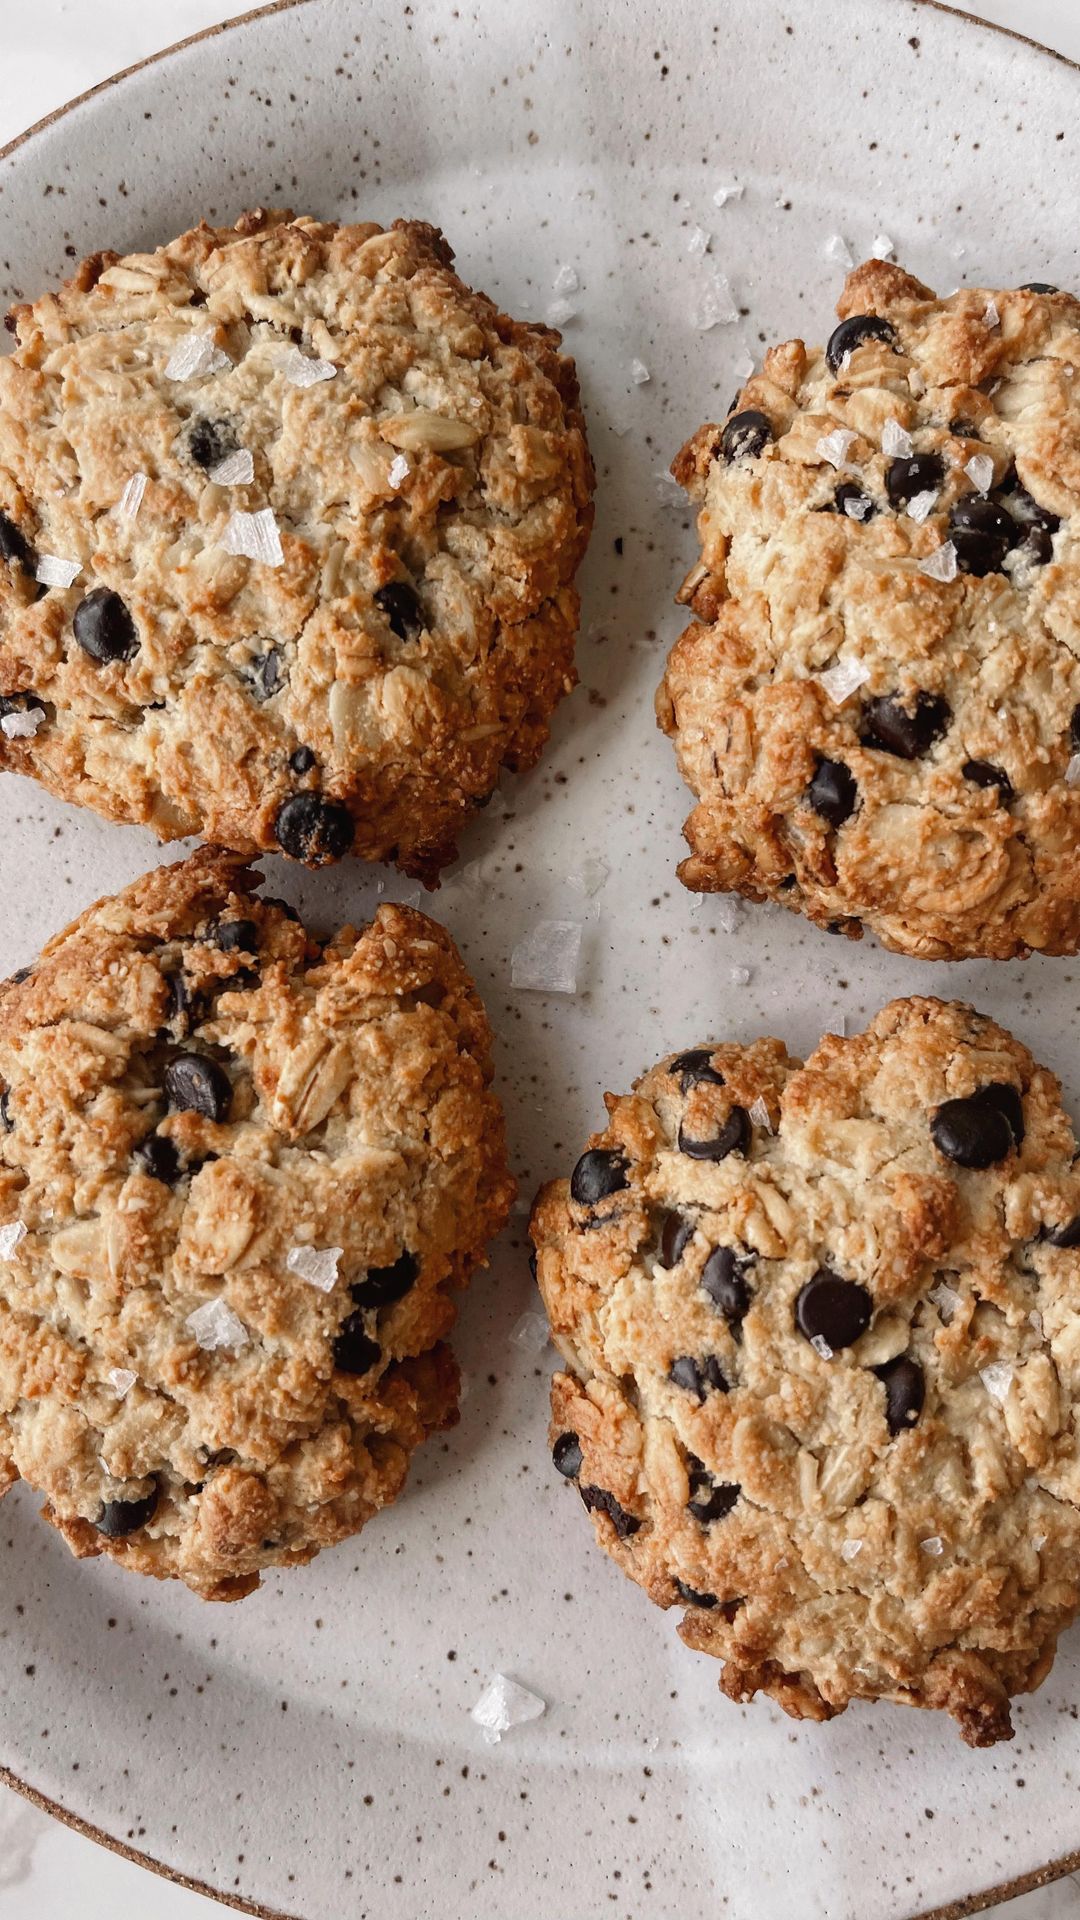 5 Minute Oatmeal Chocolate Chip Cookies